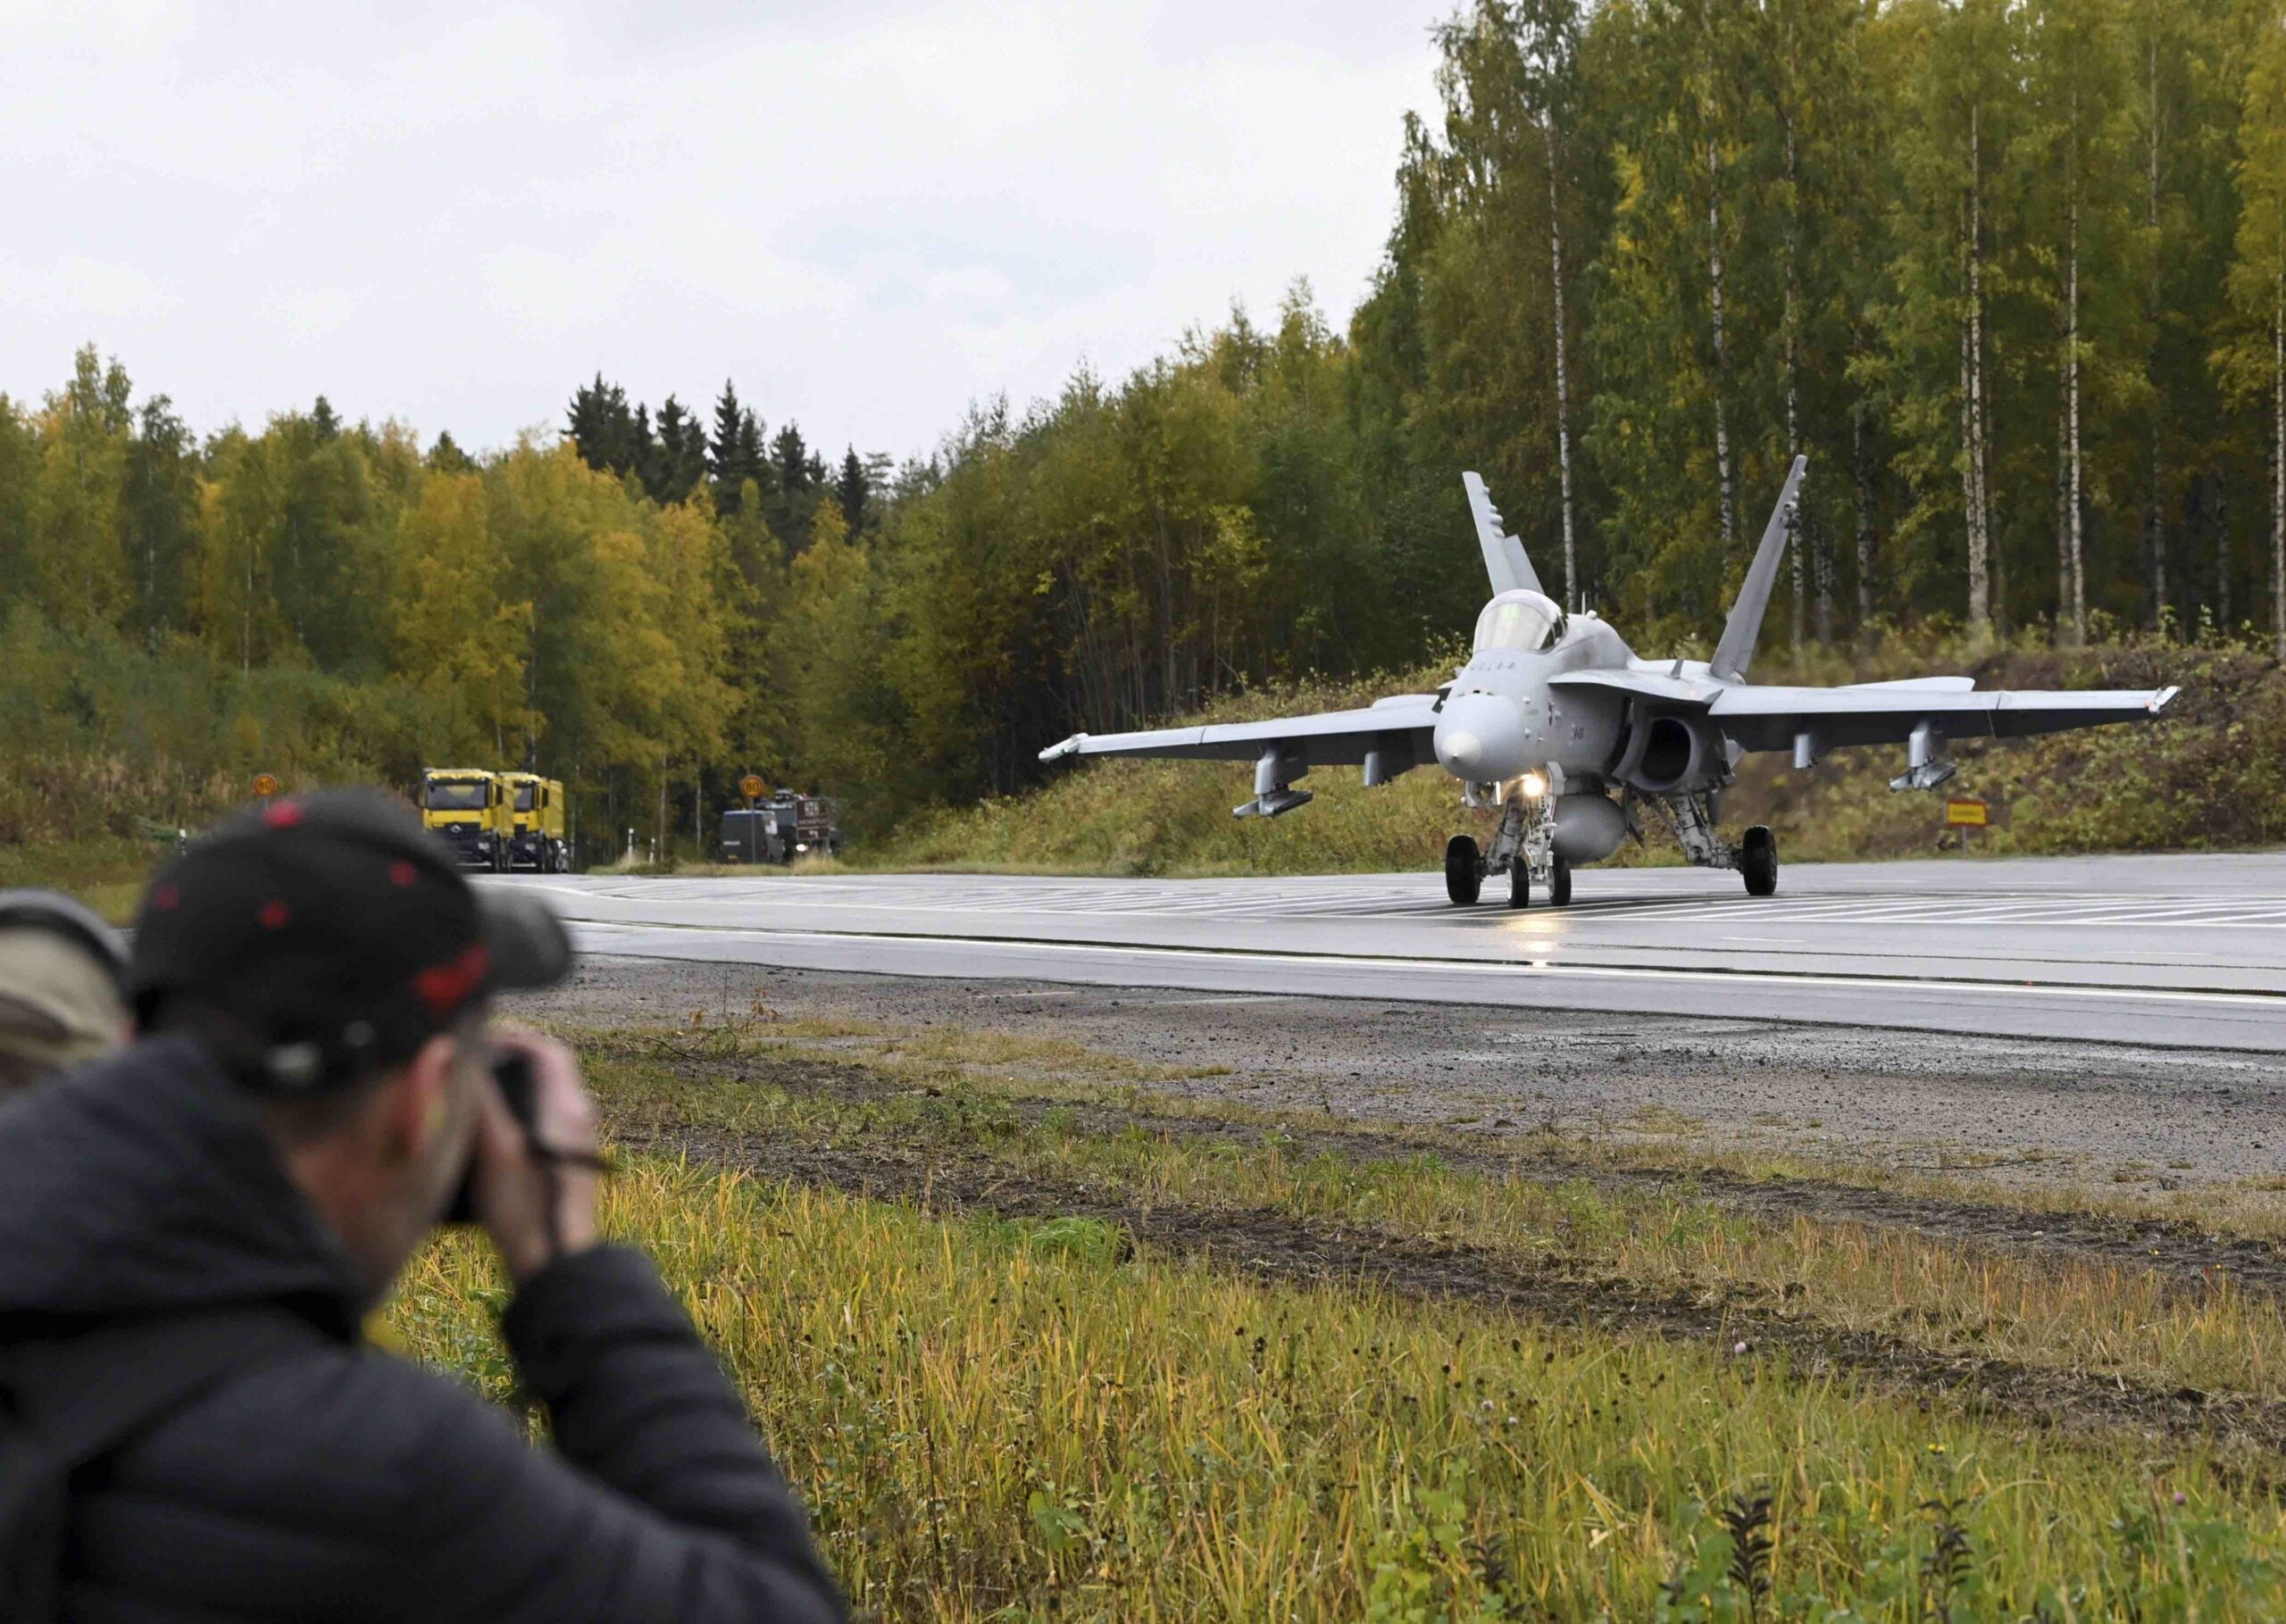 A Finnish Air Forces F/A-18 Hornet fighter gets ready to take off from the E4 Highway in Joutsa, Central Finland during the Baana 2022 training event on September 28, 2022. - Finland OUT (Photo by Markku Ulander / Lehtikuva / AFP) / Finland OUT (Photo by MARKKU ULANDER/Lehtikuva/AFP via Getty Images)